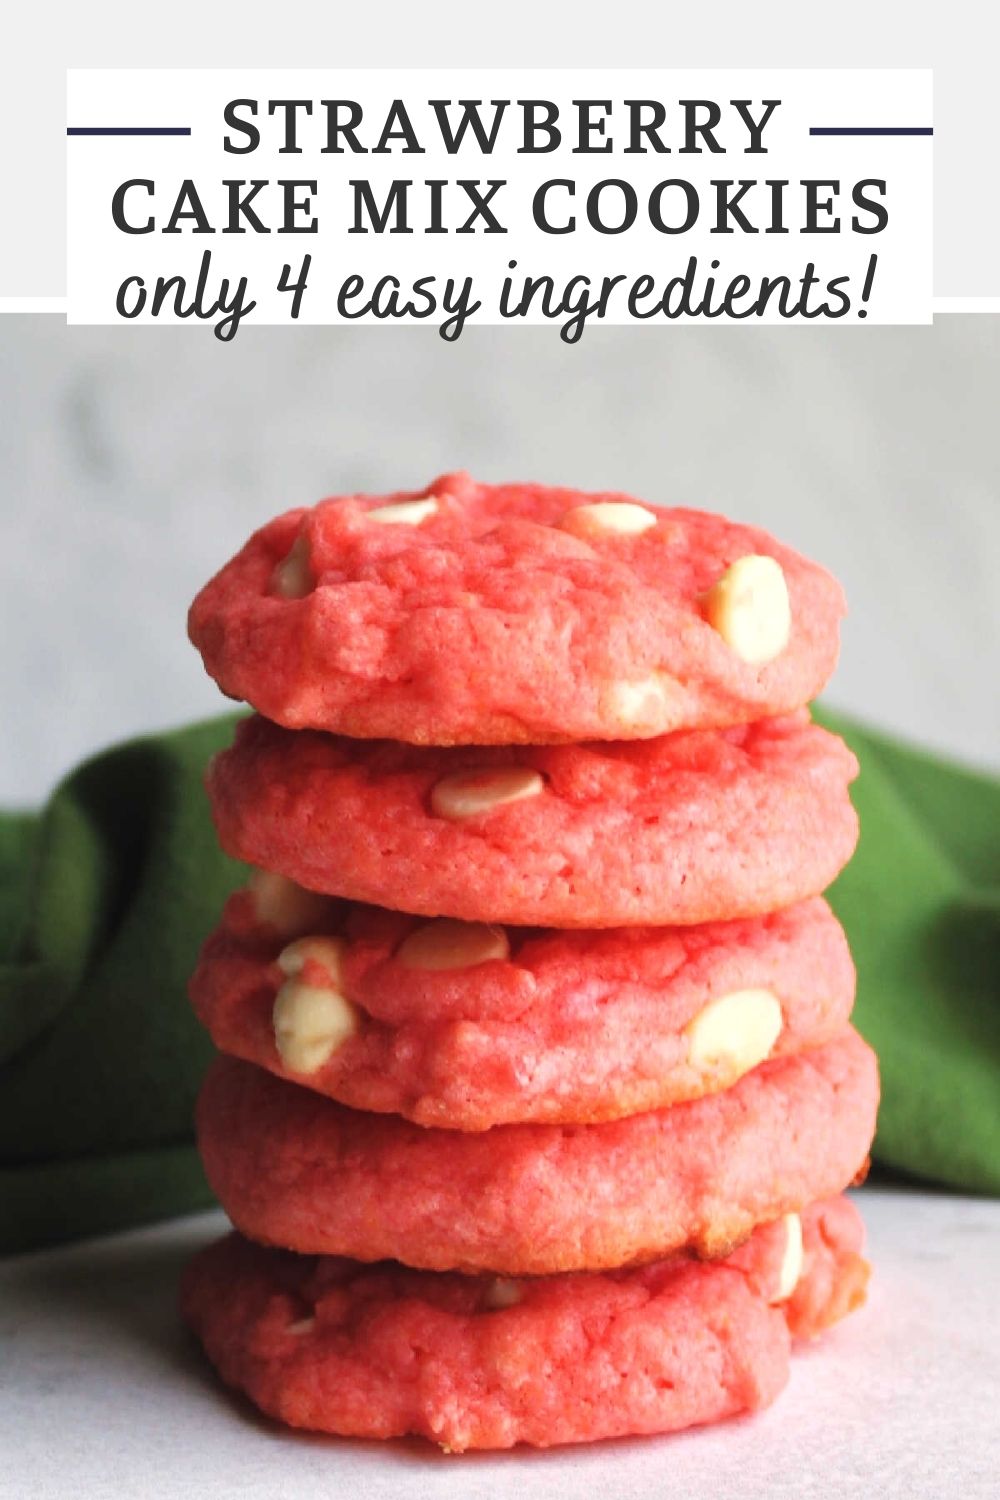 Strawberry cake mix cookies with white chocolate chips are the perfect way to make a sweet treat in a hurry. They only take 4 simple ingredients and a few minutes to put together, but that can be out little secret. Everyone else can think you worked hard baking up a delicious dessert.